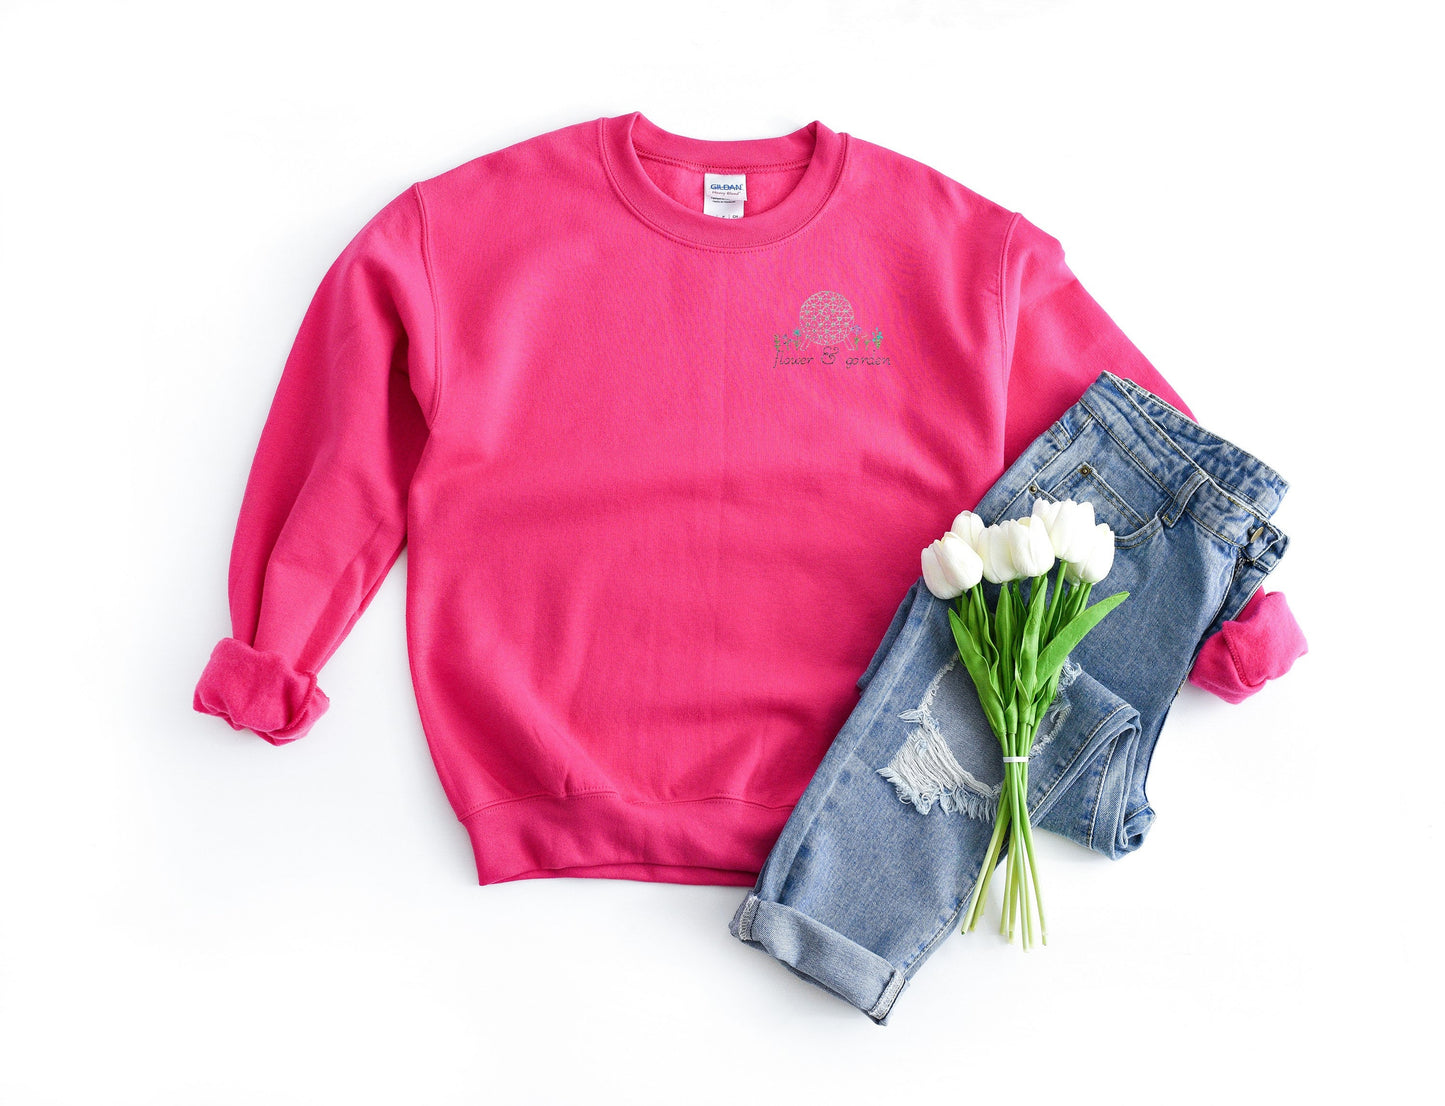 Epcot Flower and Garden Festival Embroidered Unisex Crewneck Sweater